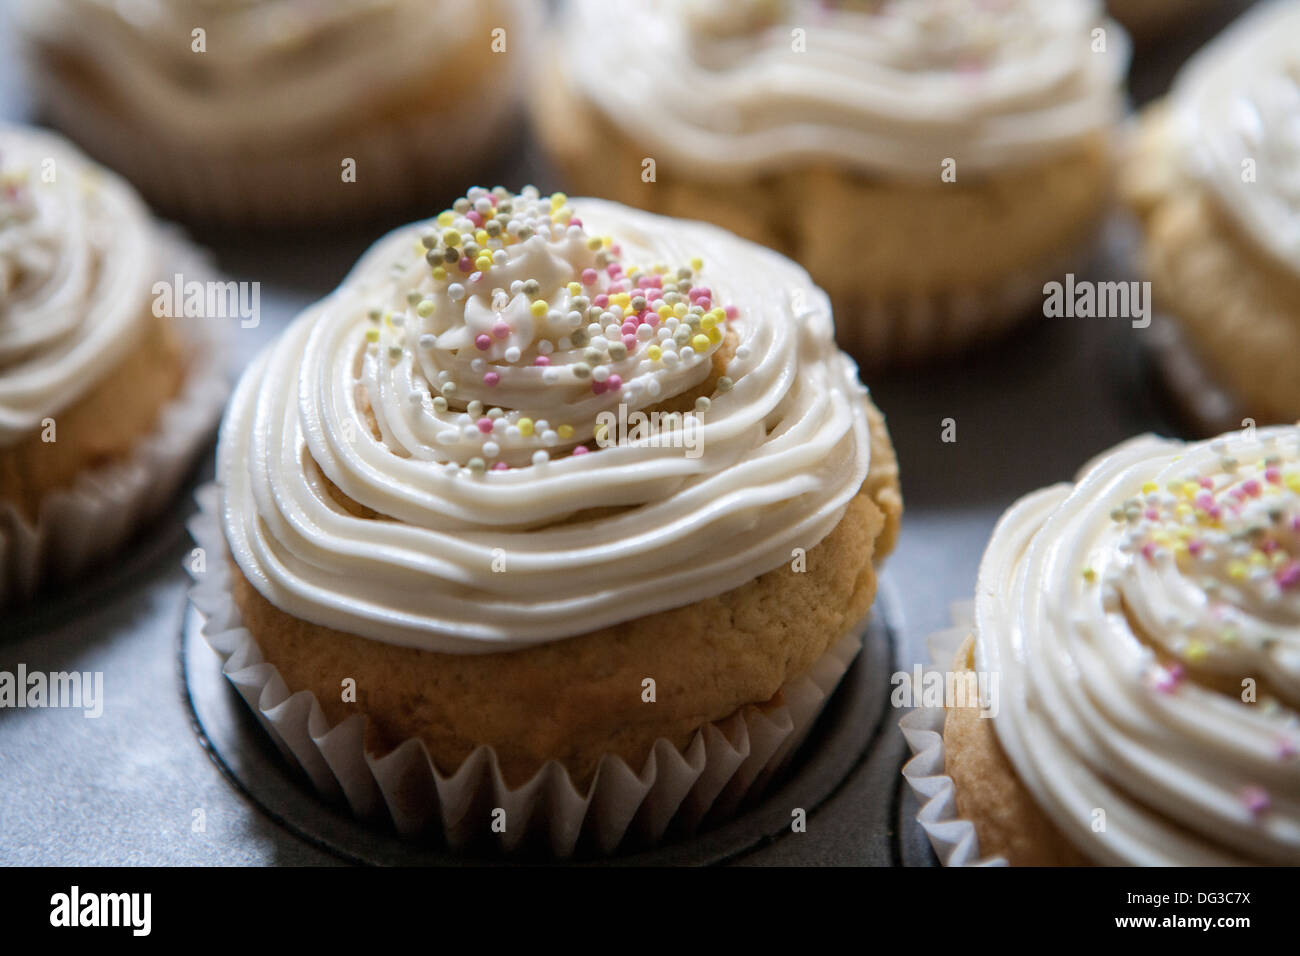 Lemon Vanilla Cupcakes with Cream Cheese Icing and Sprinkles, Close-Up Stock Photo